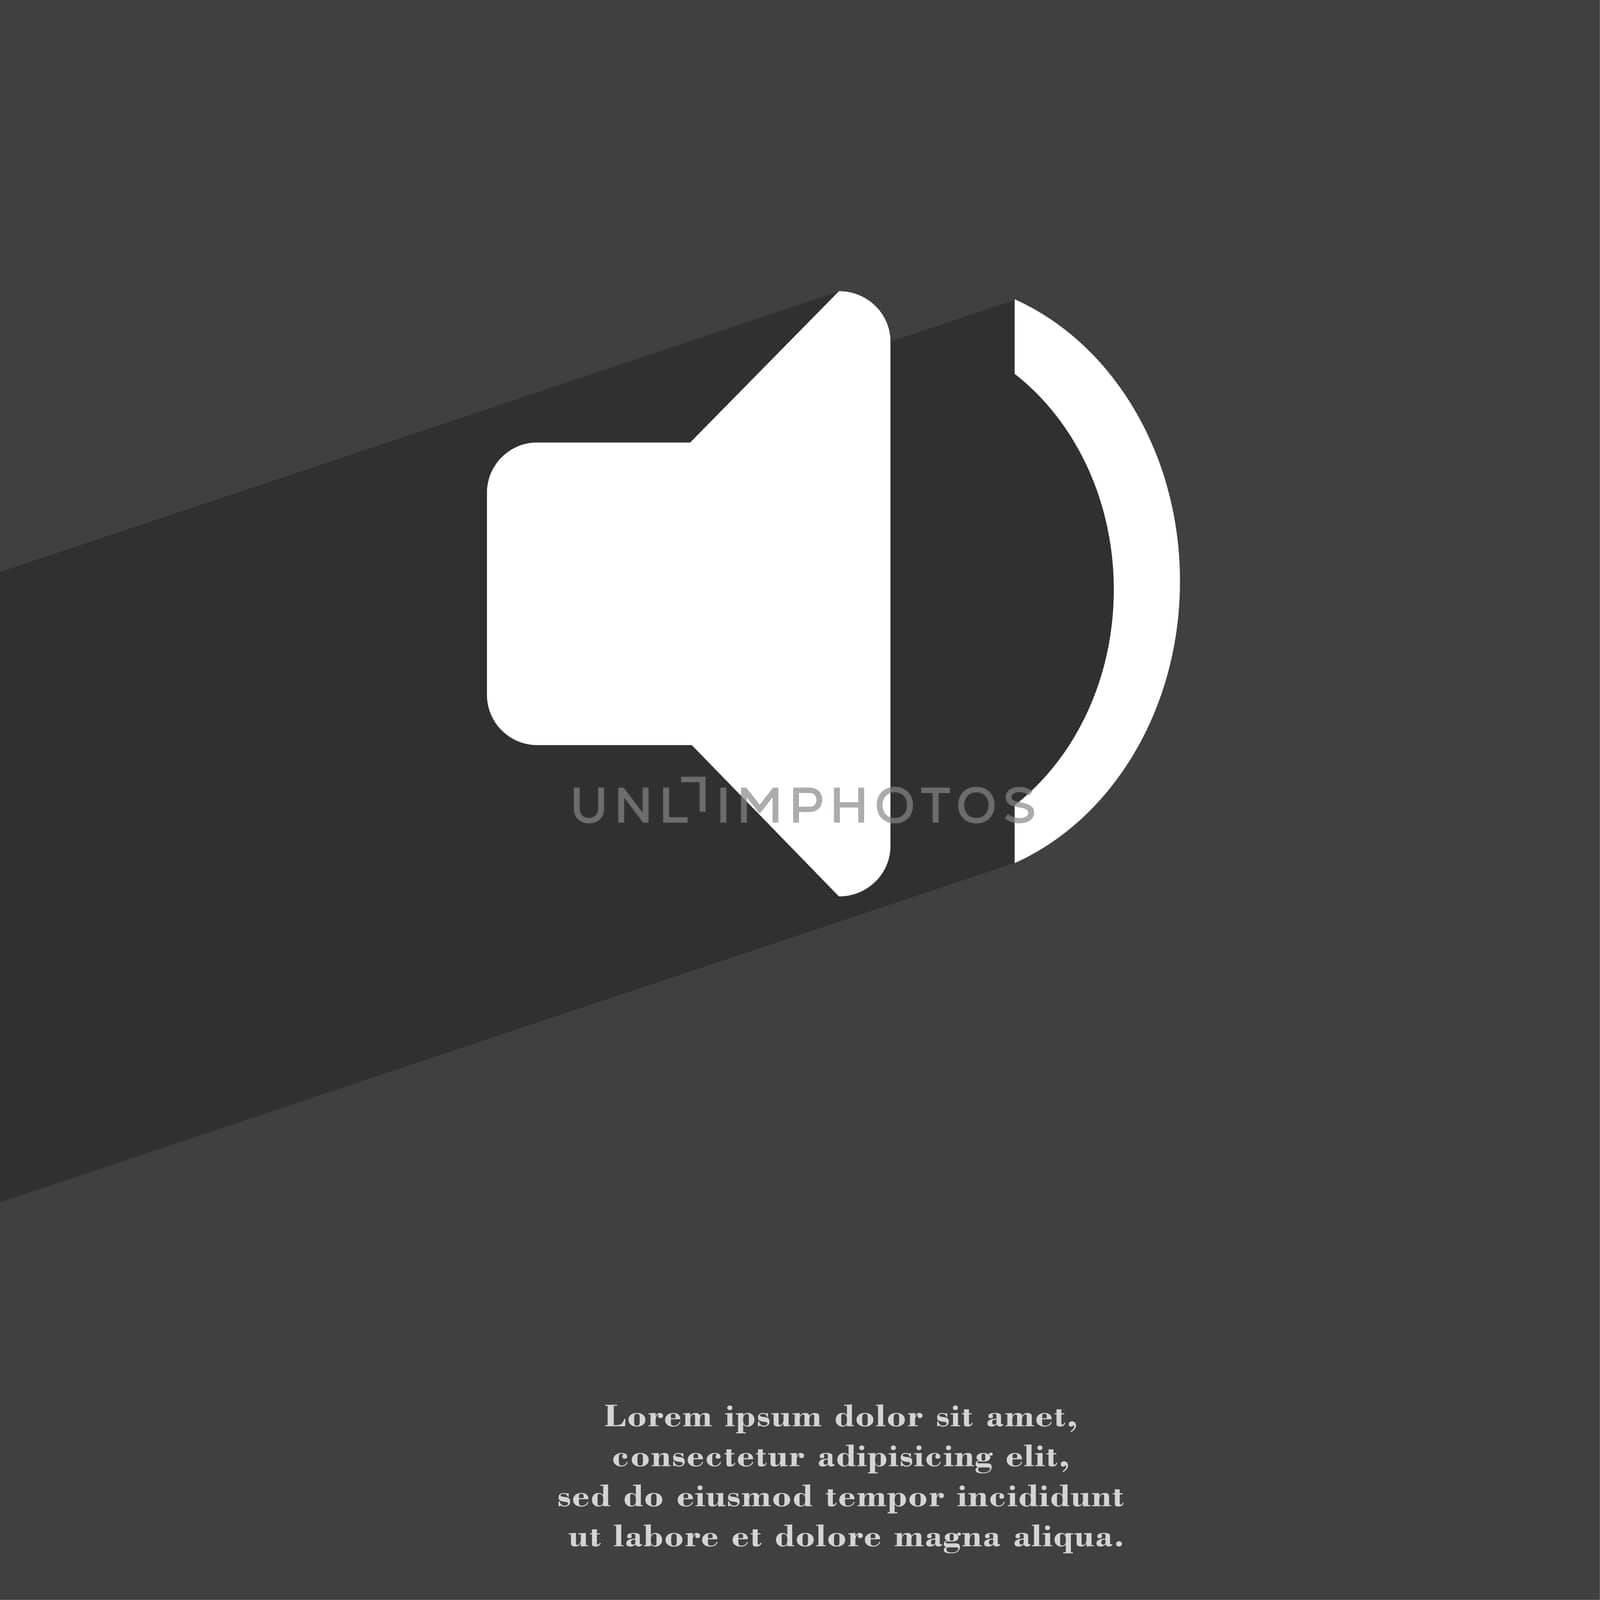 Speaker volume, Sound icon symbol Flat modern web design with long shadow and space for your text. illustration